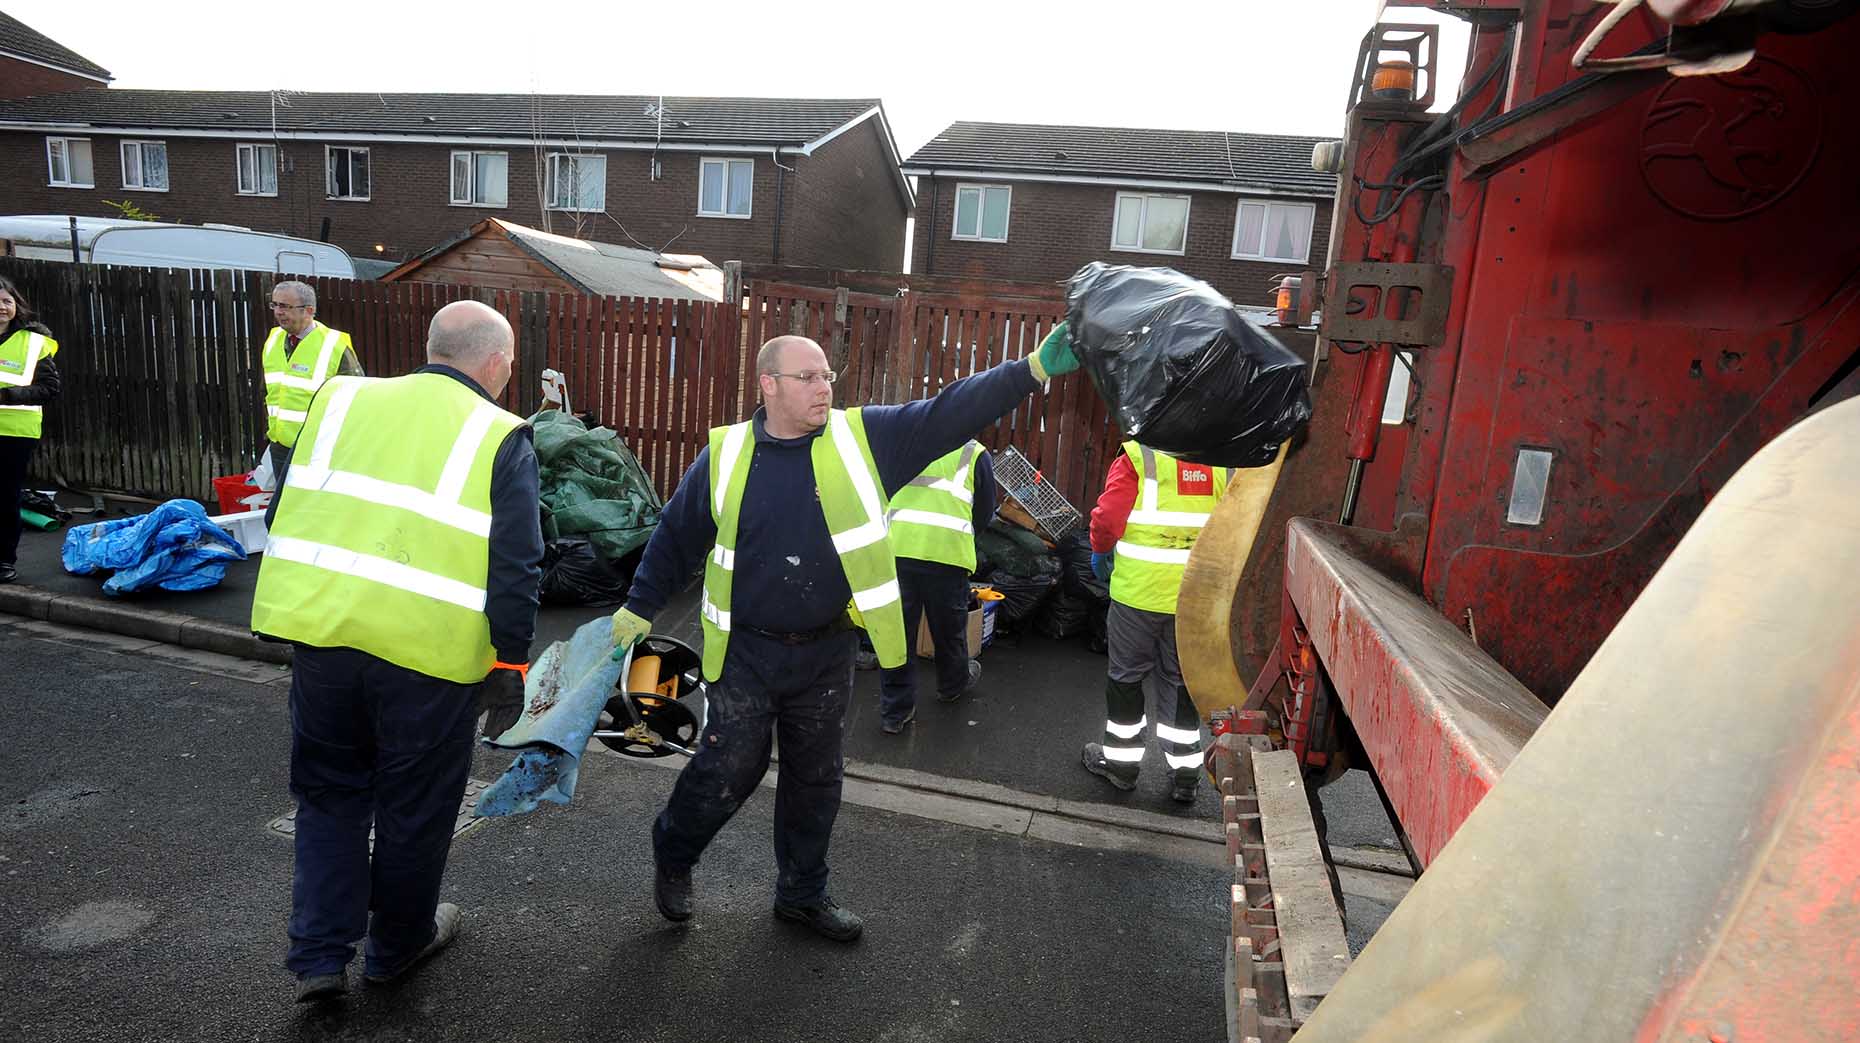 Over 50 tonnes of waste removed in Birchwood clean-up